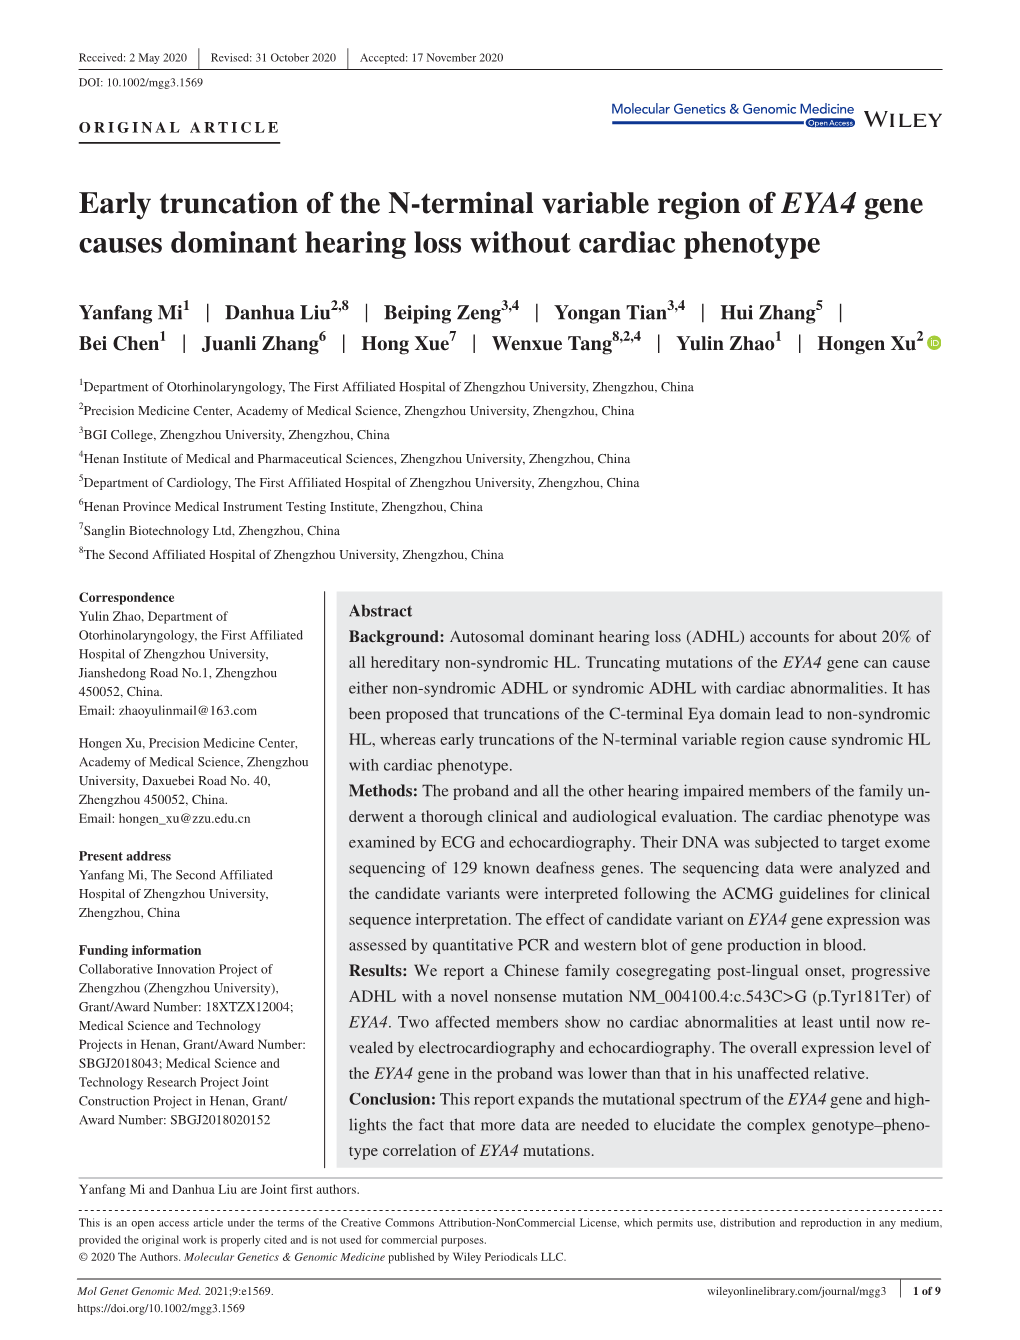 Terminal Variable Region of EYA4 Gene Causes Dominant Hearing Loss Without Cardiac Phenotype